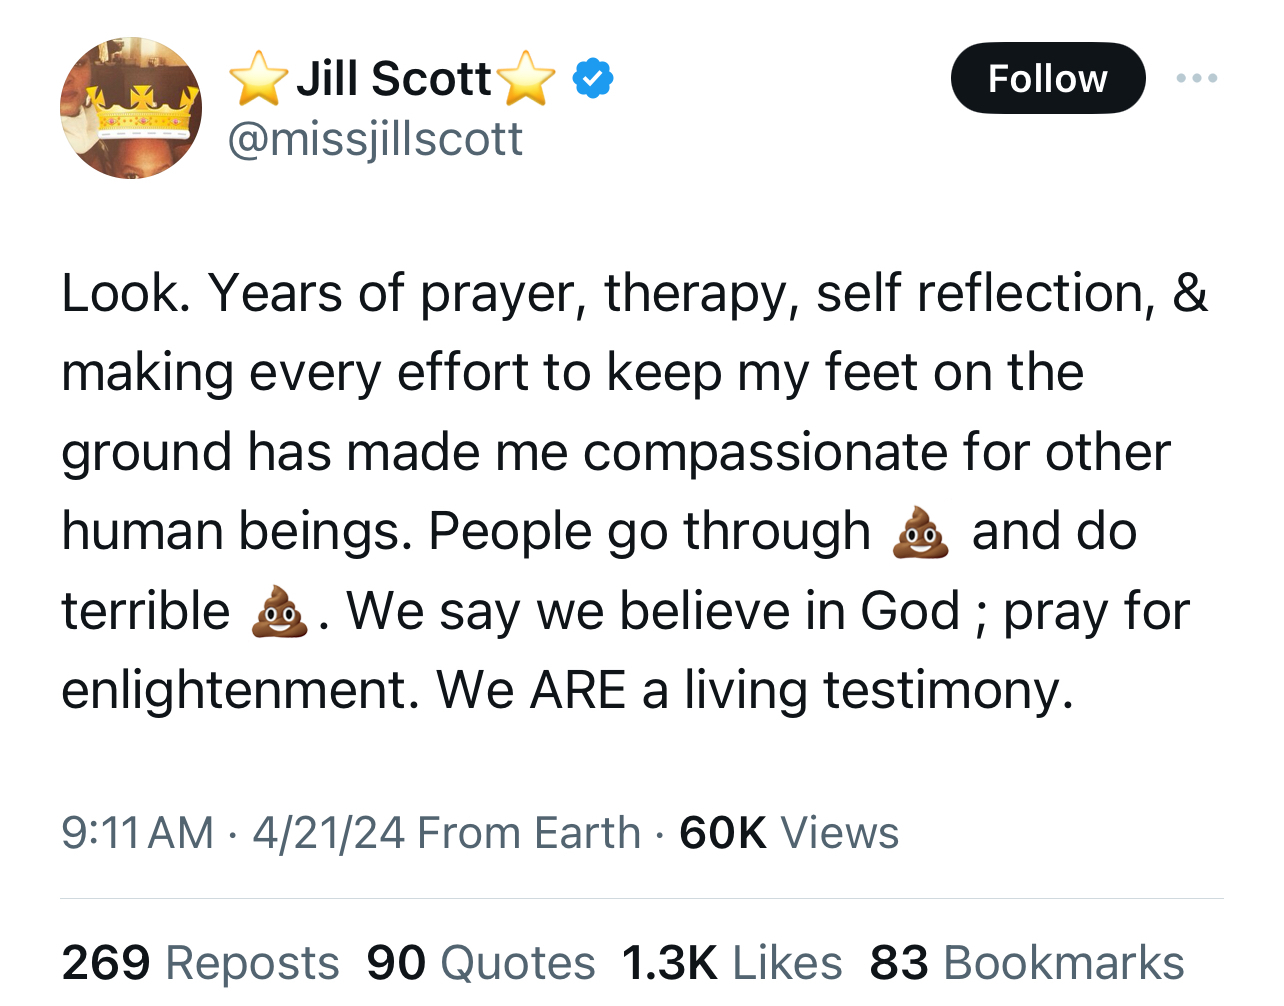 Tweet by Jill Scott discussing her personal growth and belief in God, stressing her experiences and enlightenment